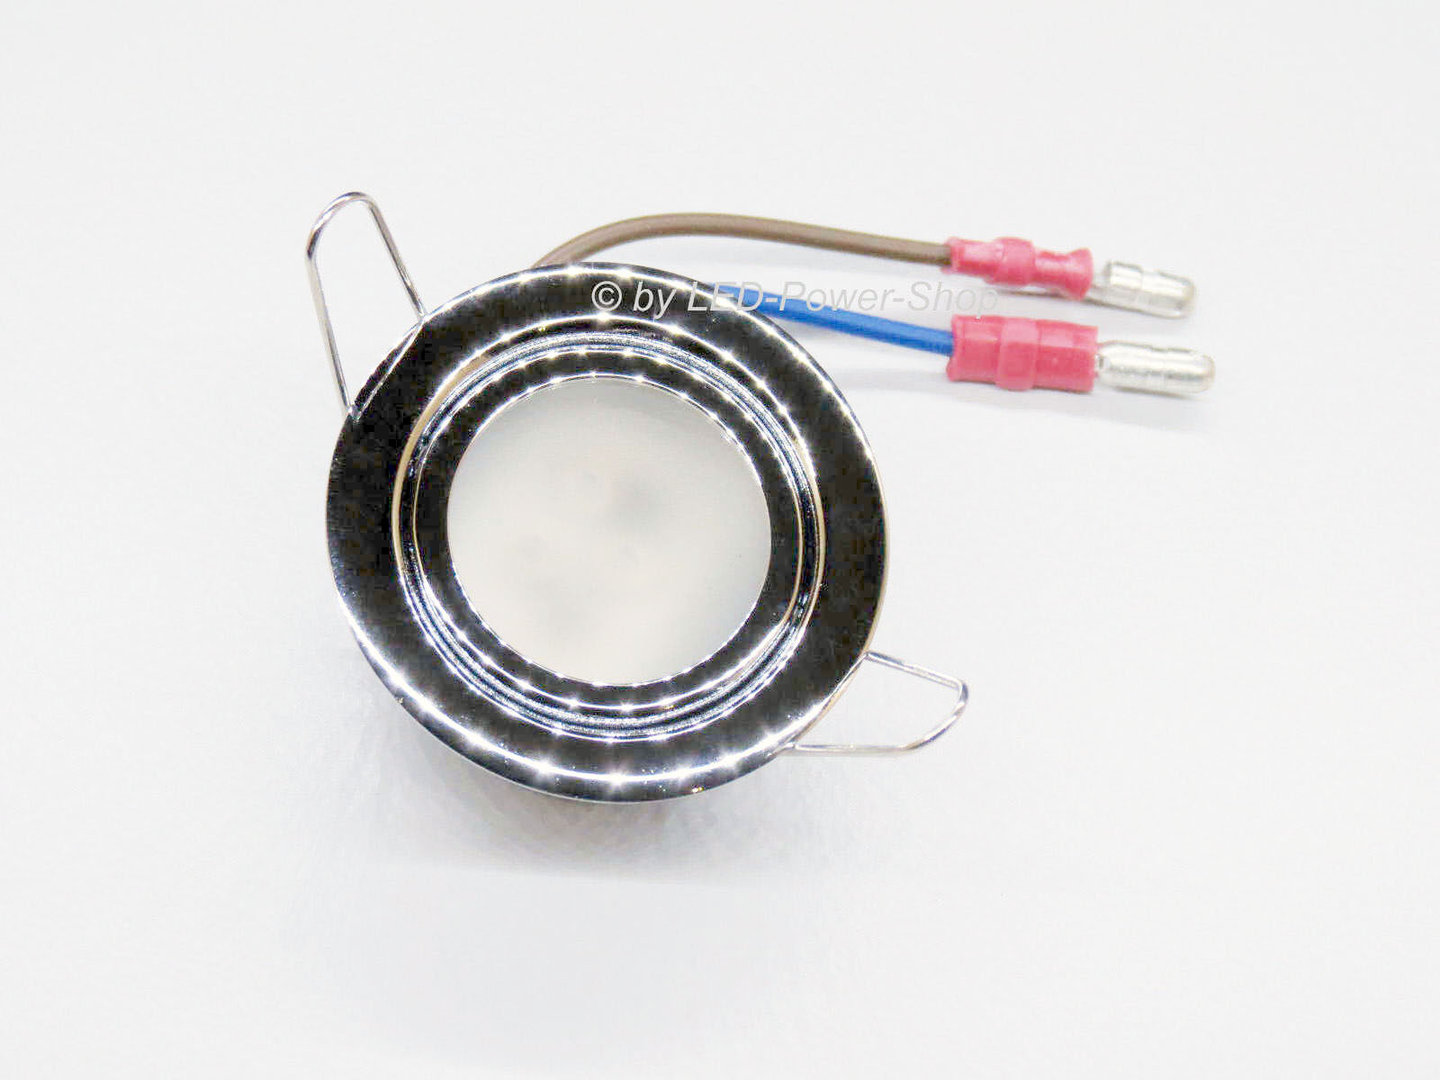 12V Dometic recessed light 3 LED frosted glass E. Pins chrome with leg spring